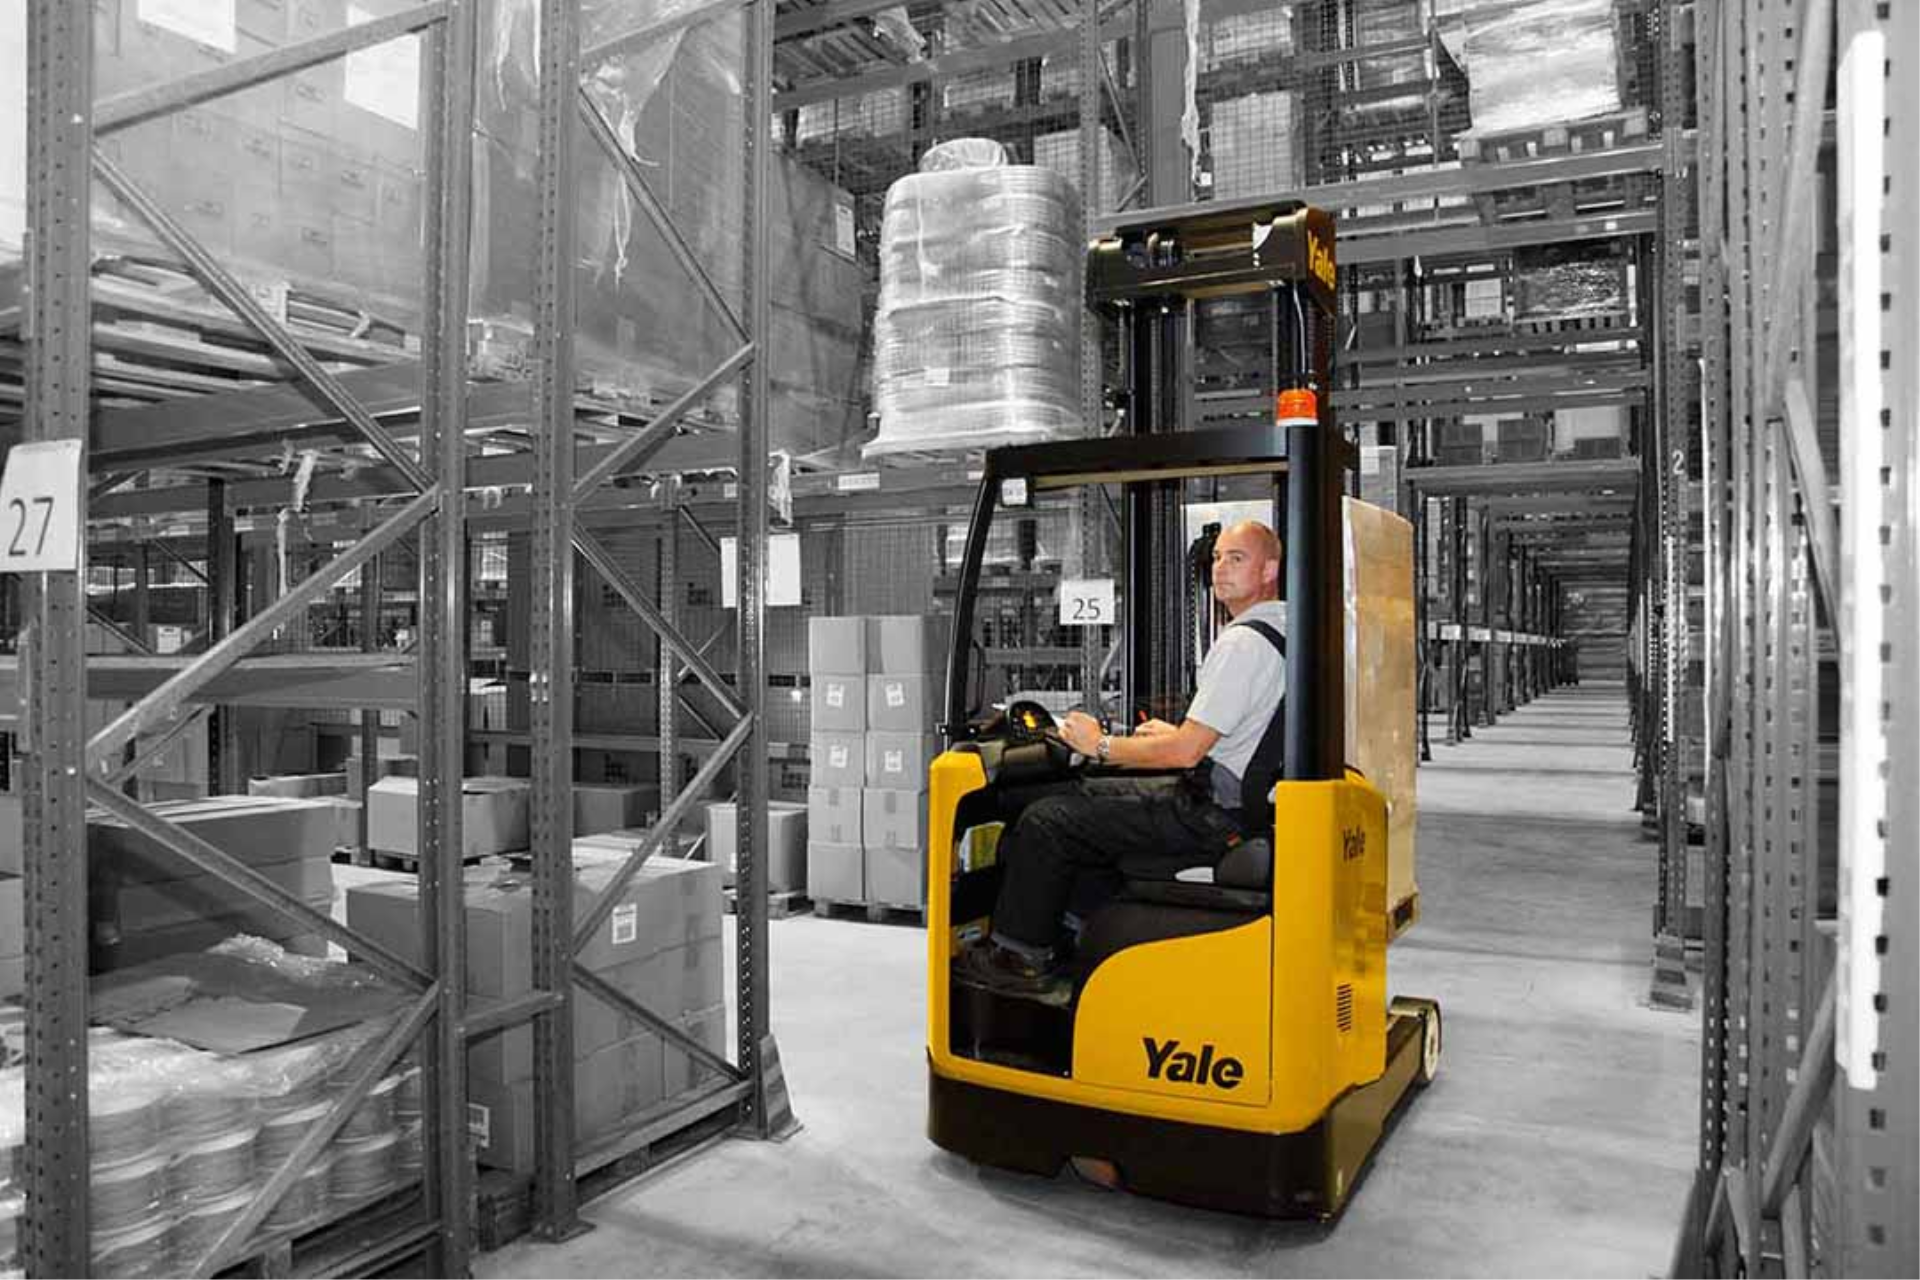 Reach Truck is widely used in warehouse racking systems with narrow aisles and high density of goods